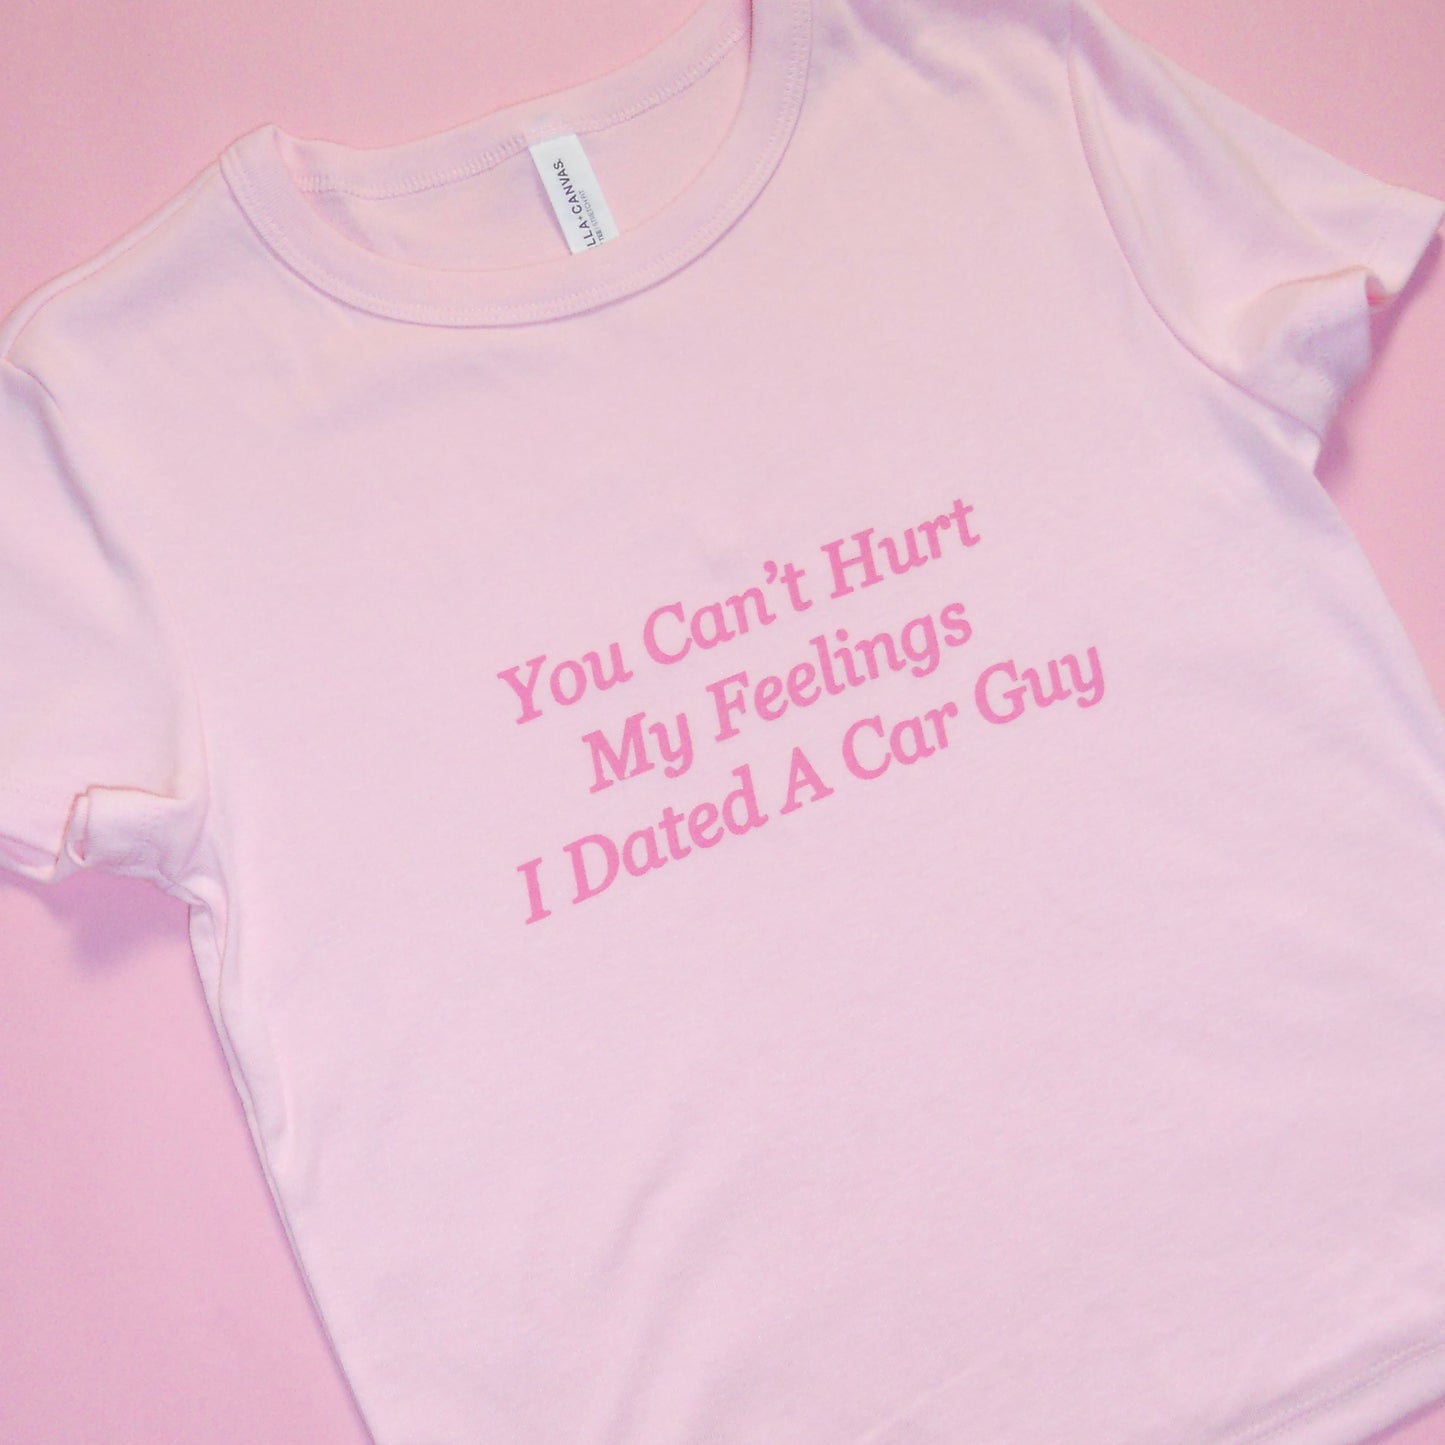 I DATED A CAR GUY baby tee